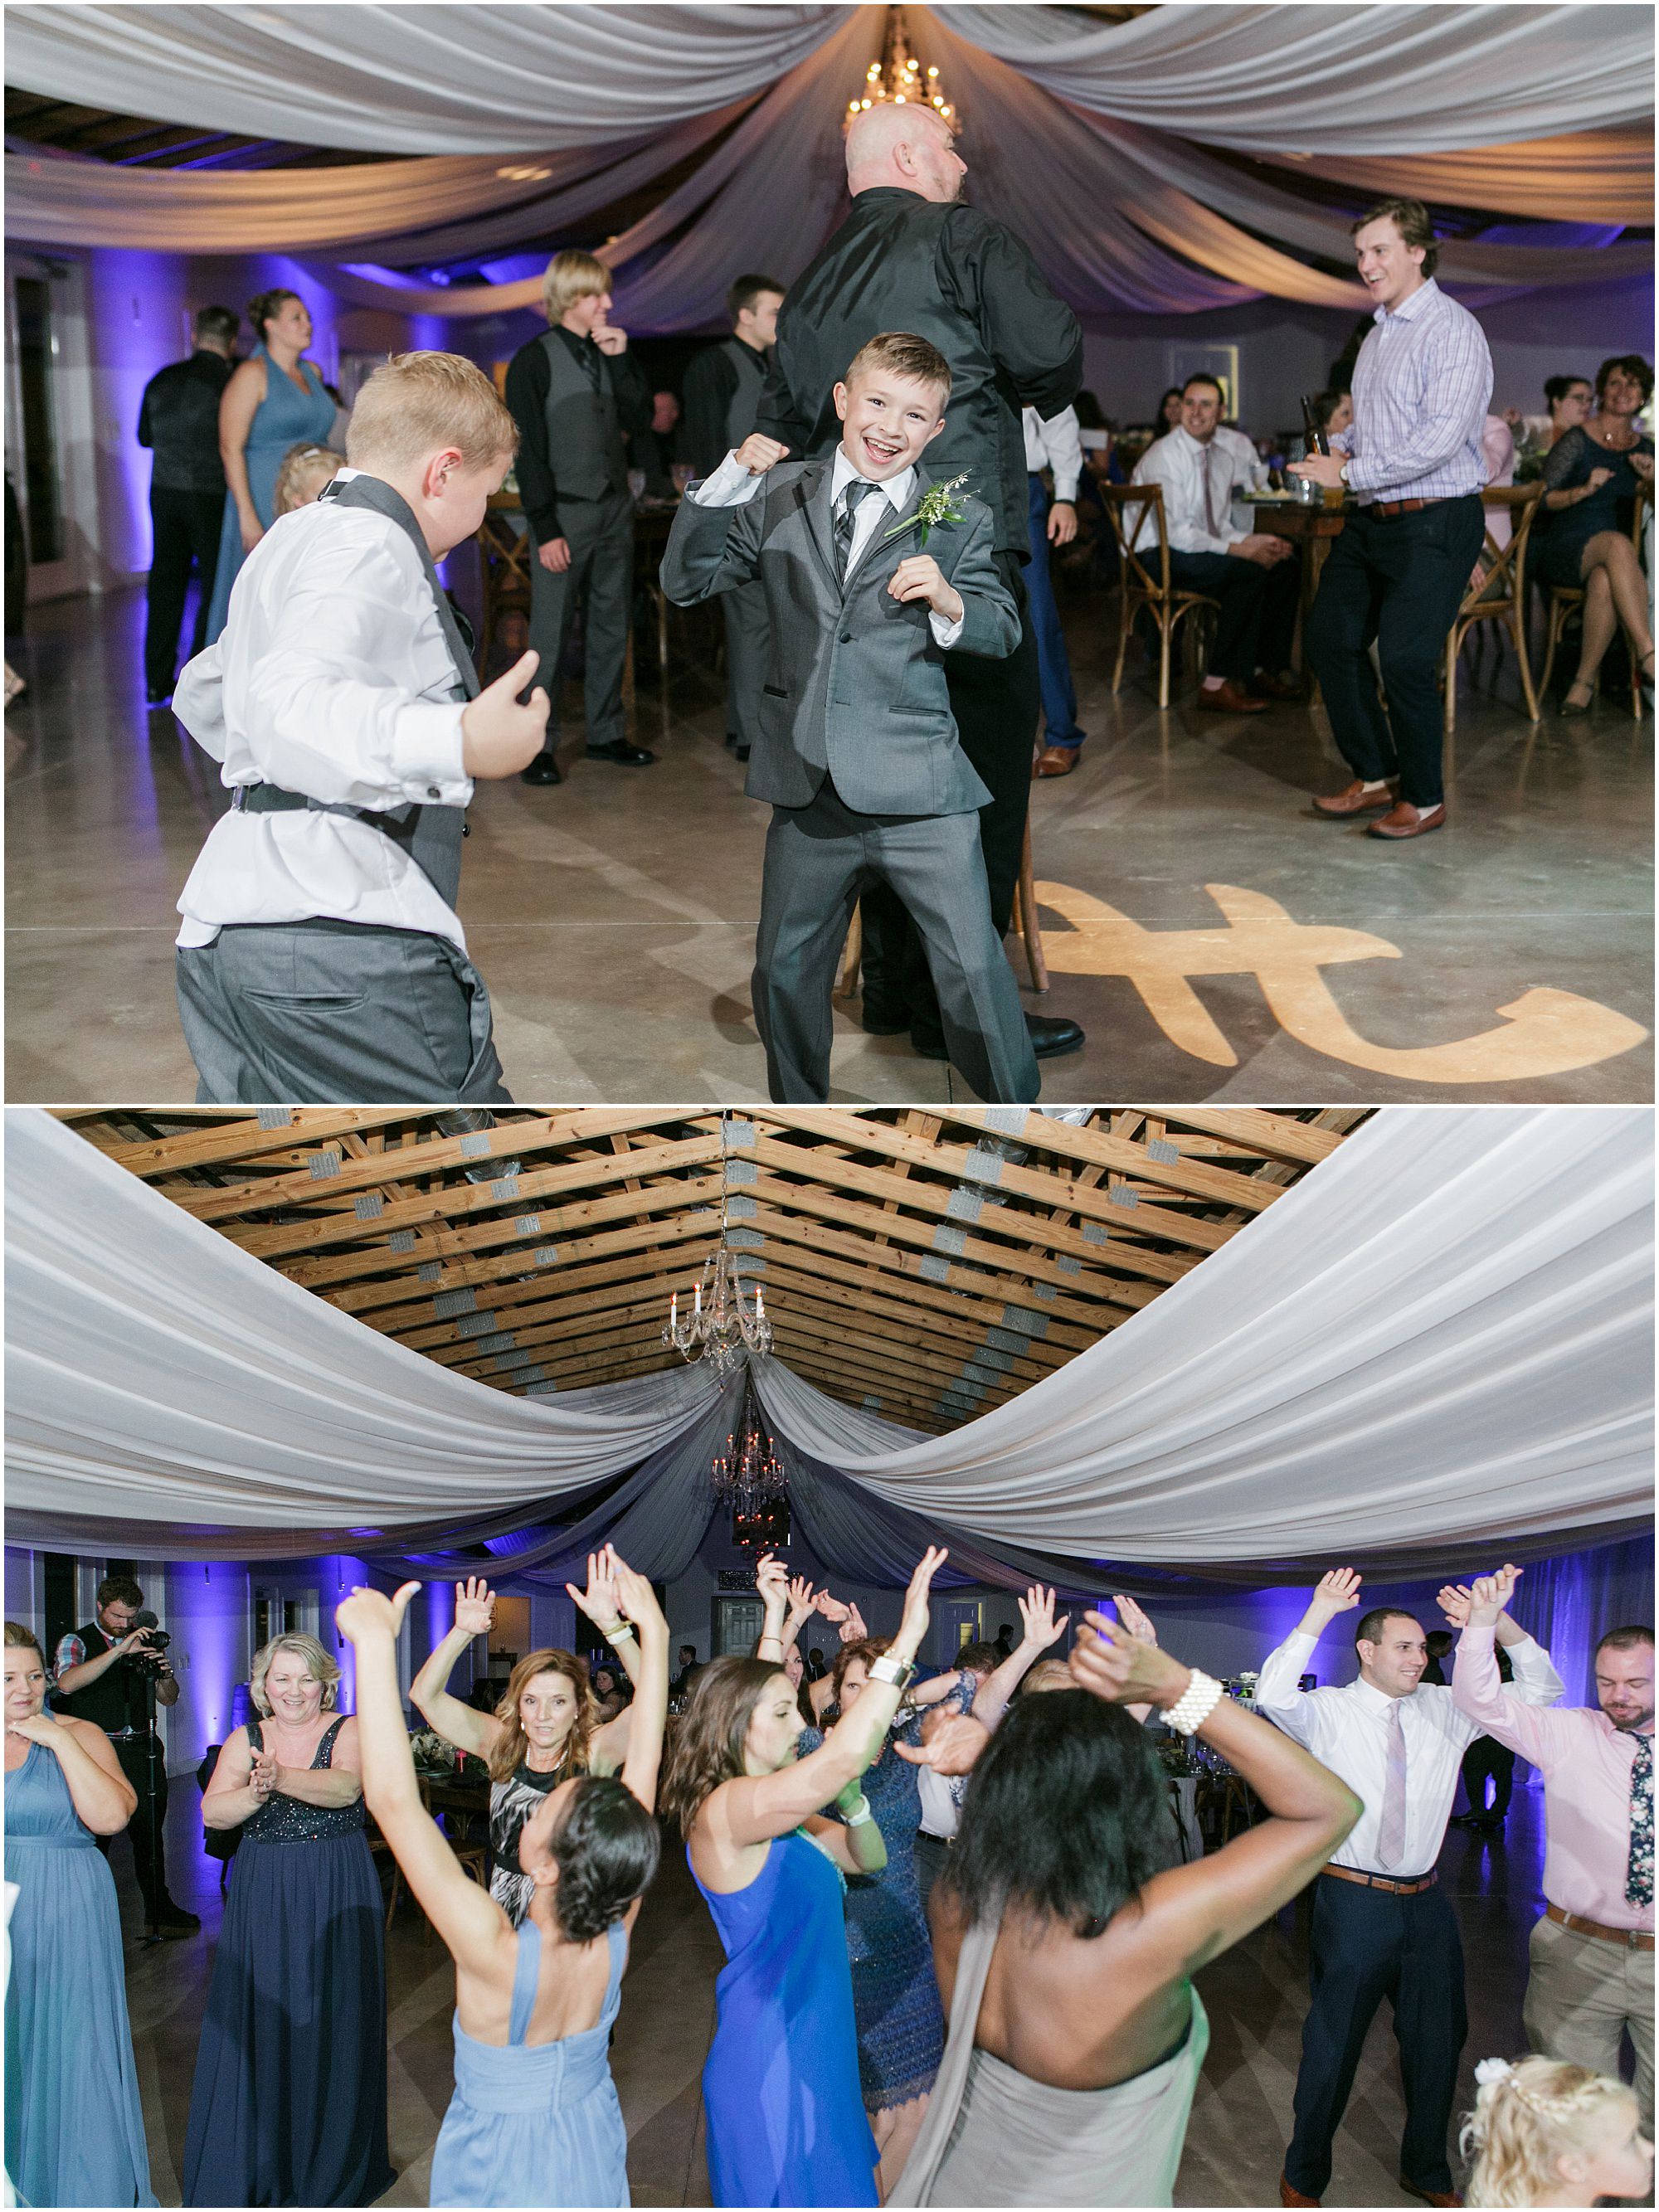 Guests dancing at the wedding reception. 